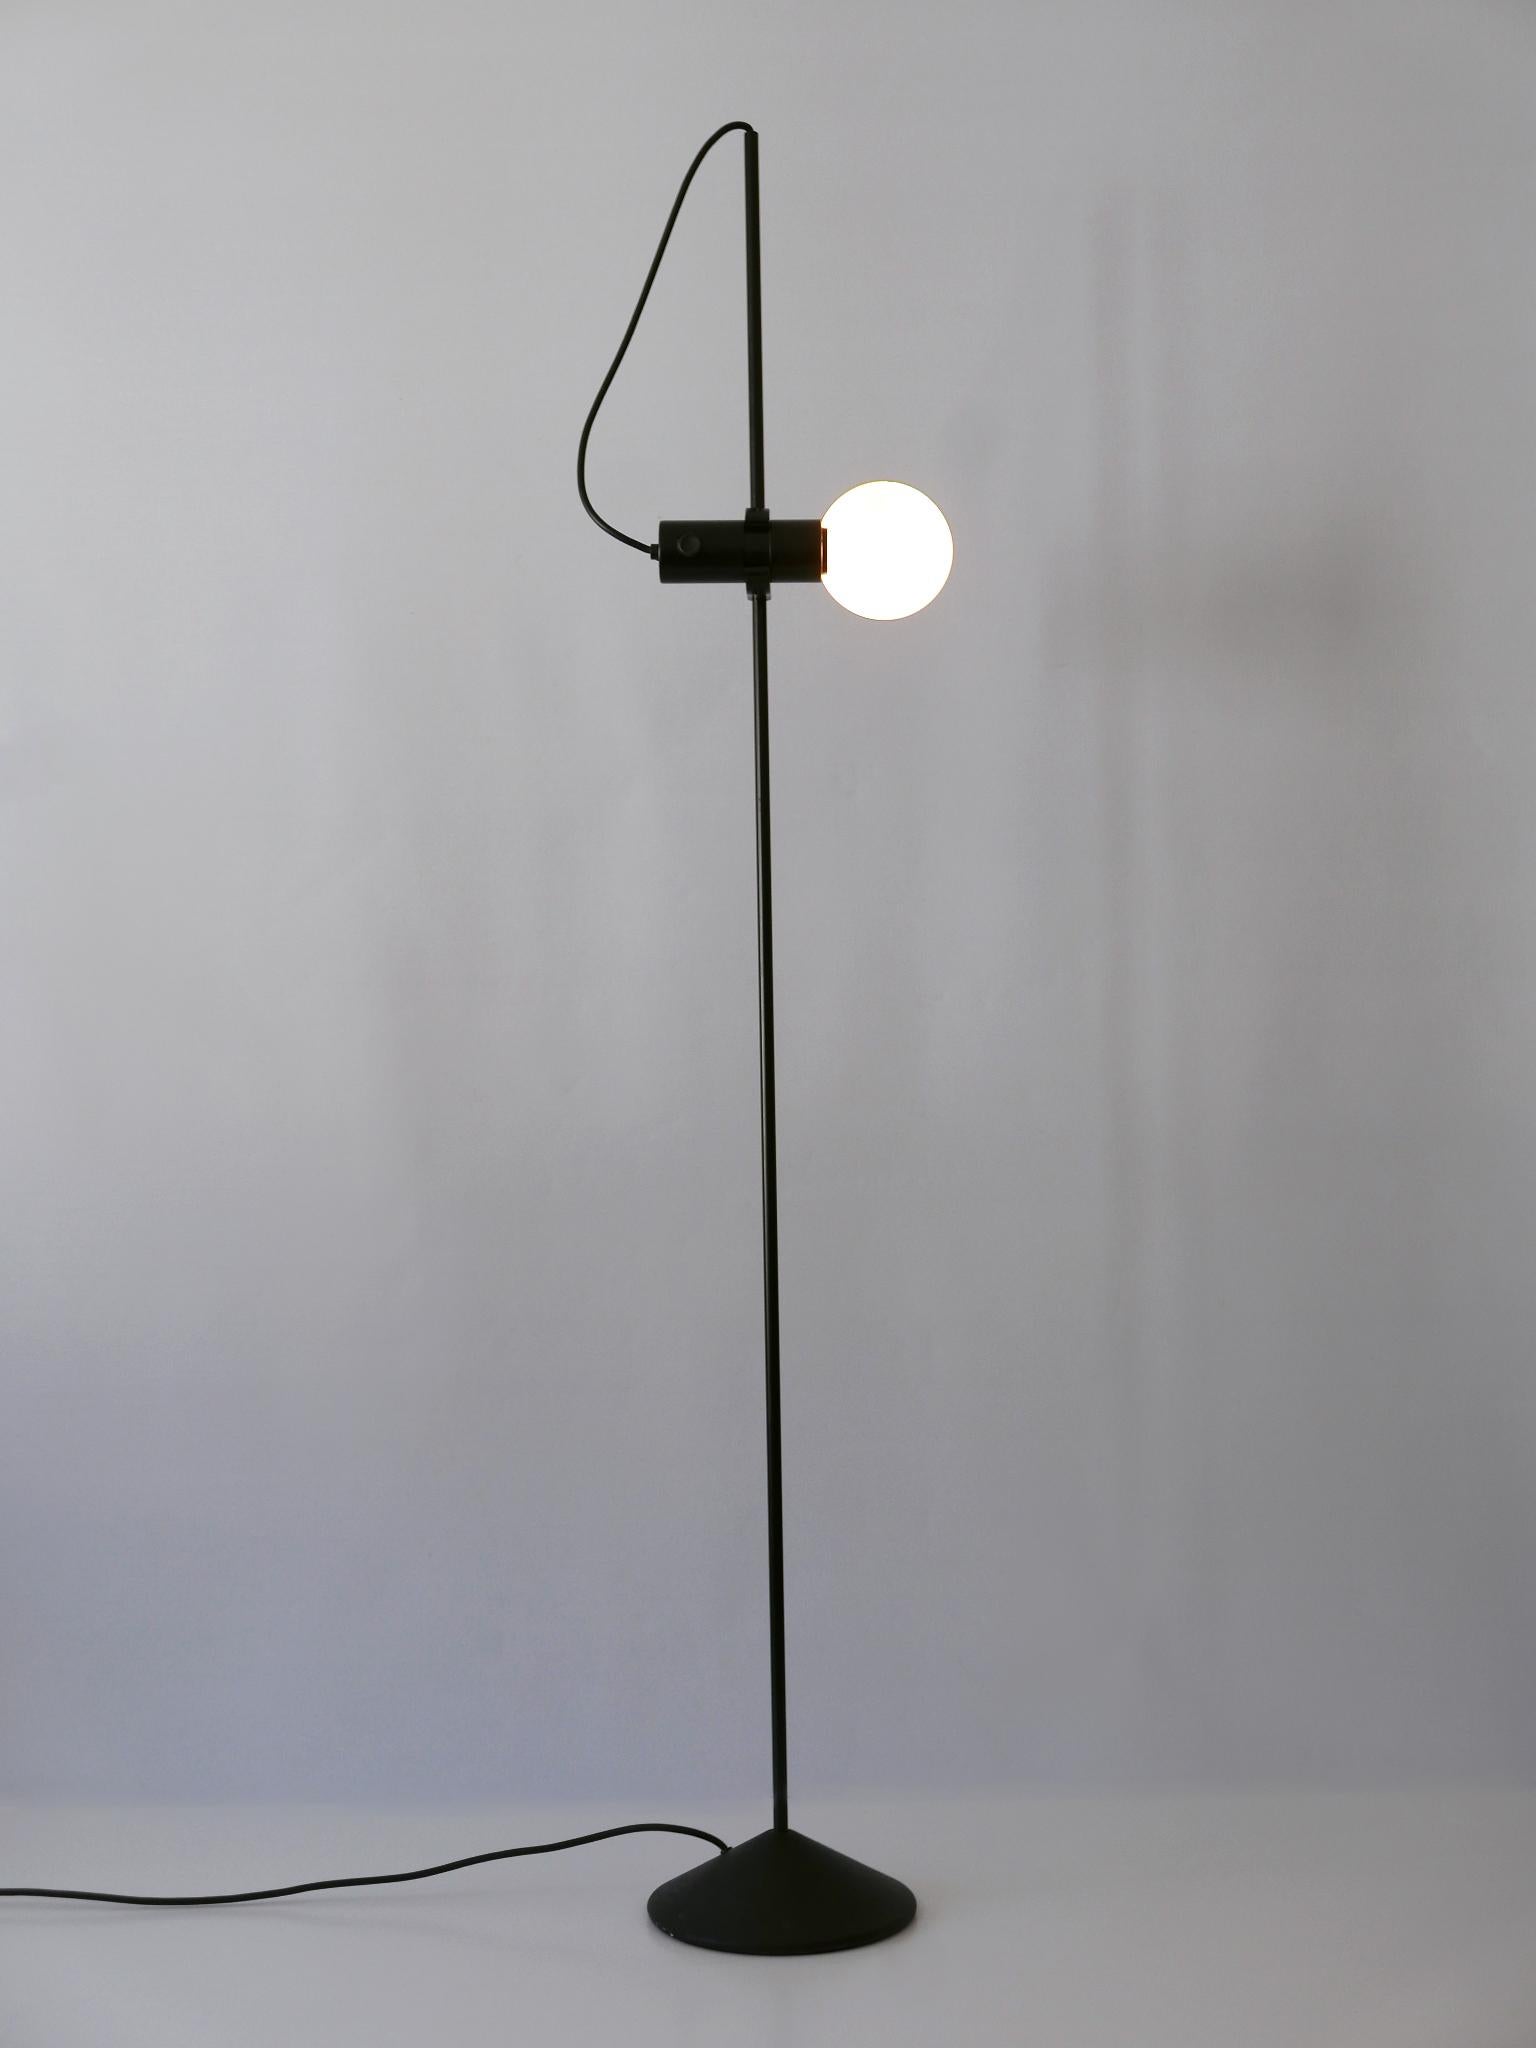 Late 20th Century Rare Floor Lamp or Reading Light by Barbieri e Marianelli for Tronconi 1970s For Sale